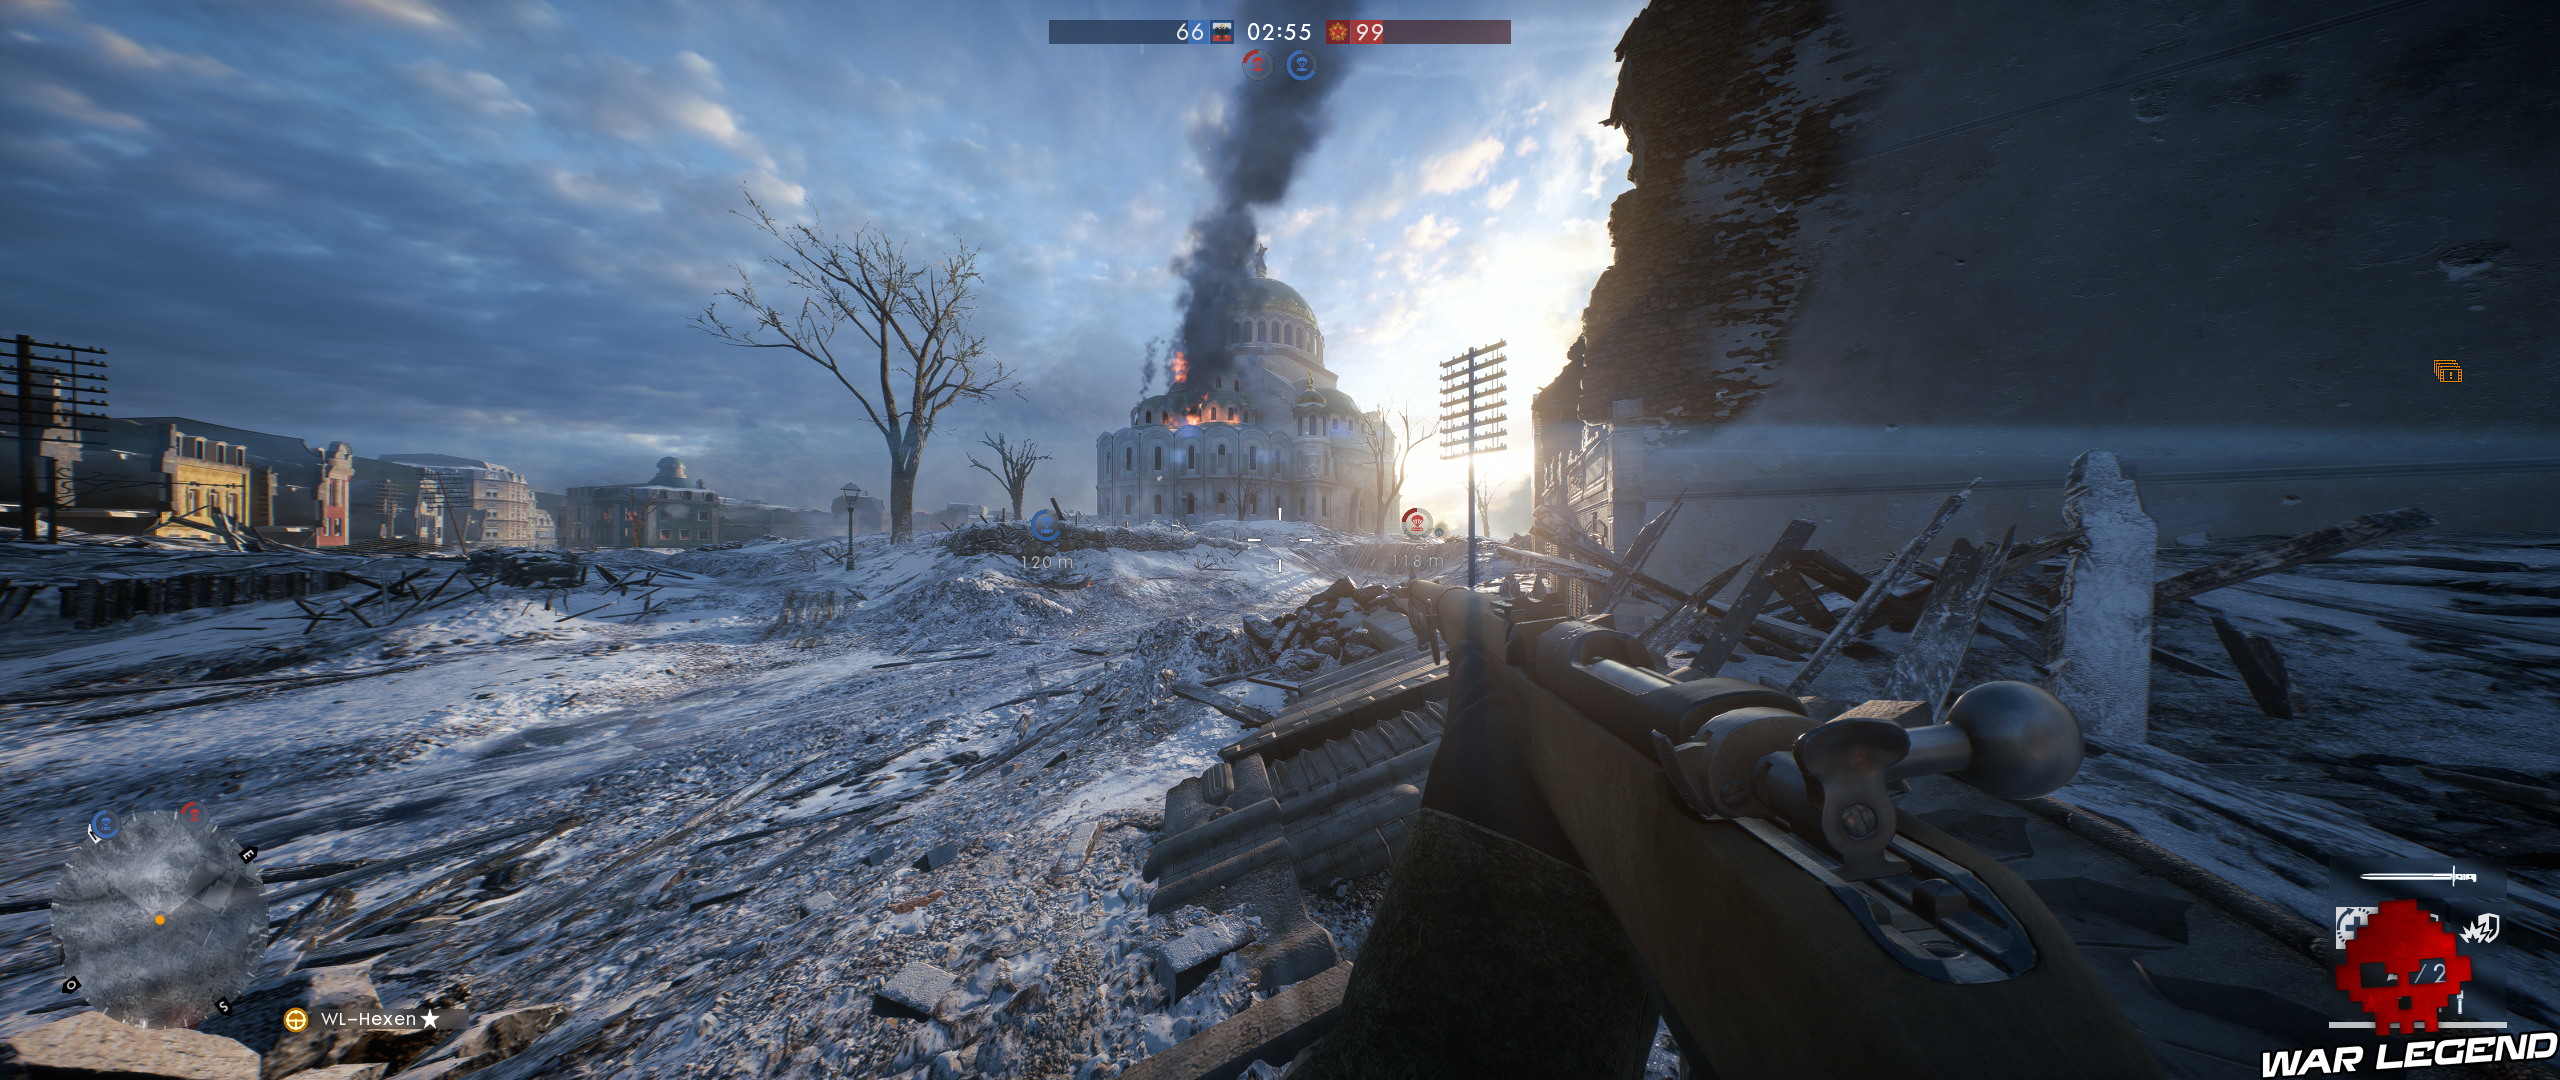 Test Battlefield 1 In the Name of the Tsar